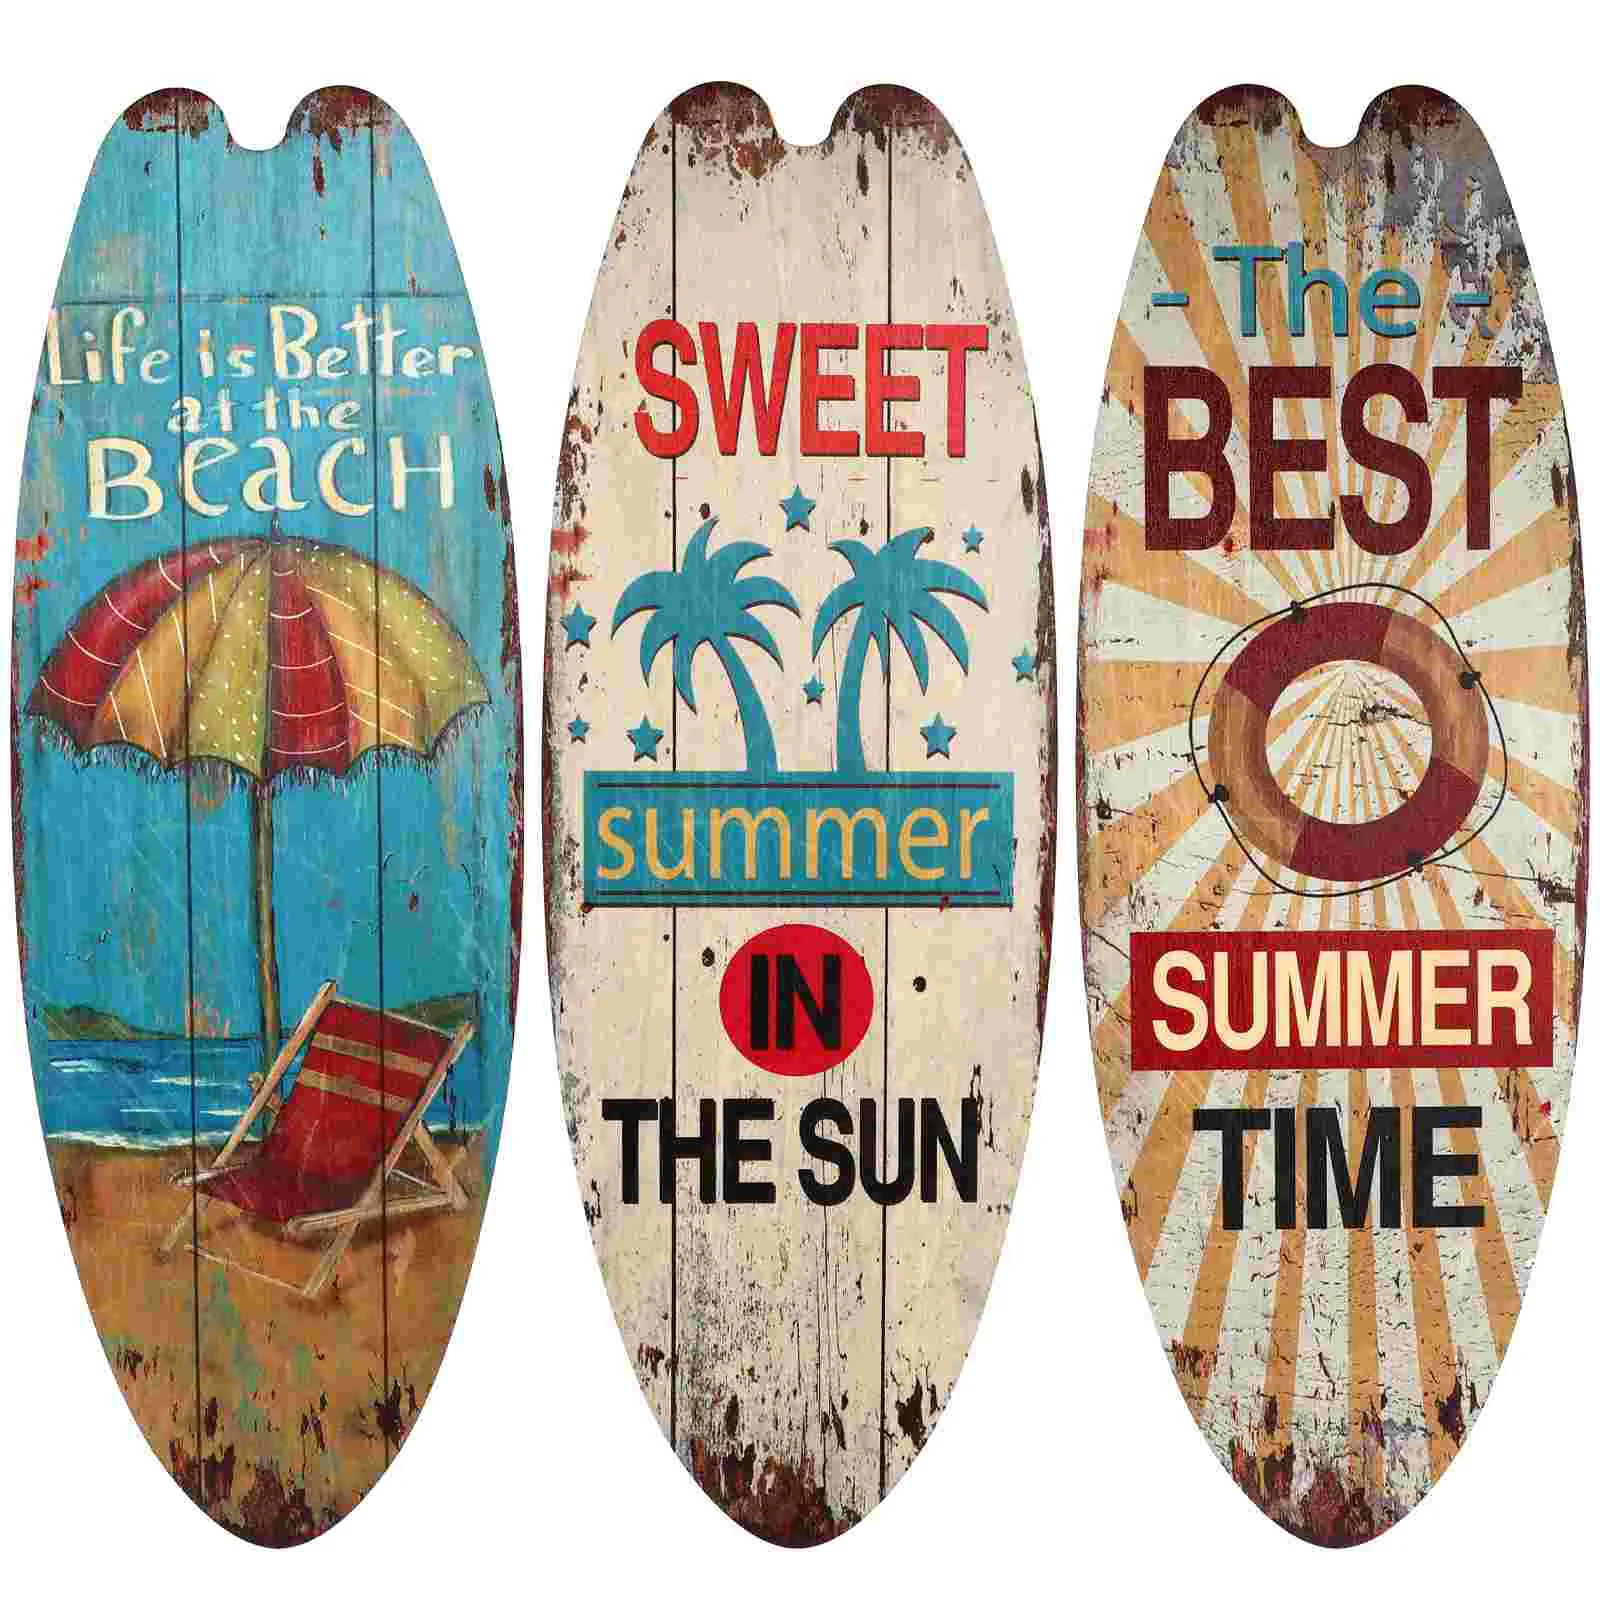 

3 Pcs Necessity Surfboard Wooden Sign Beach Vacation Summer Decorations Boards Decorating Indoor Plaque